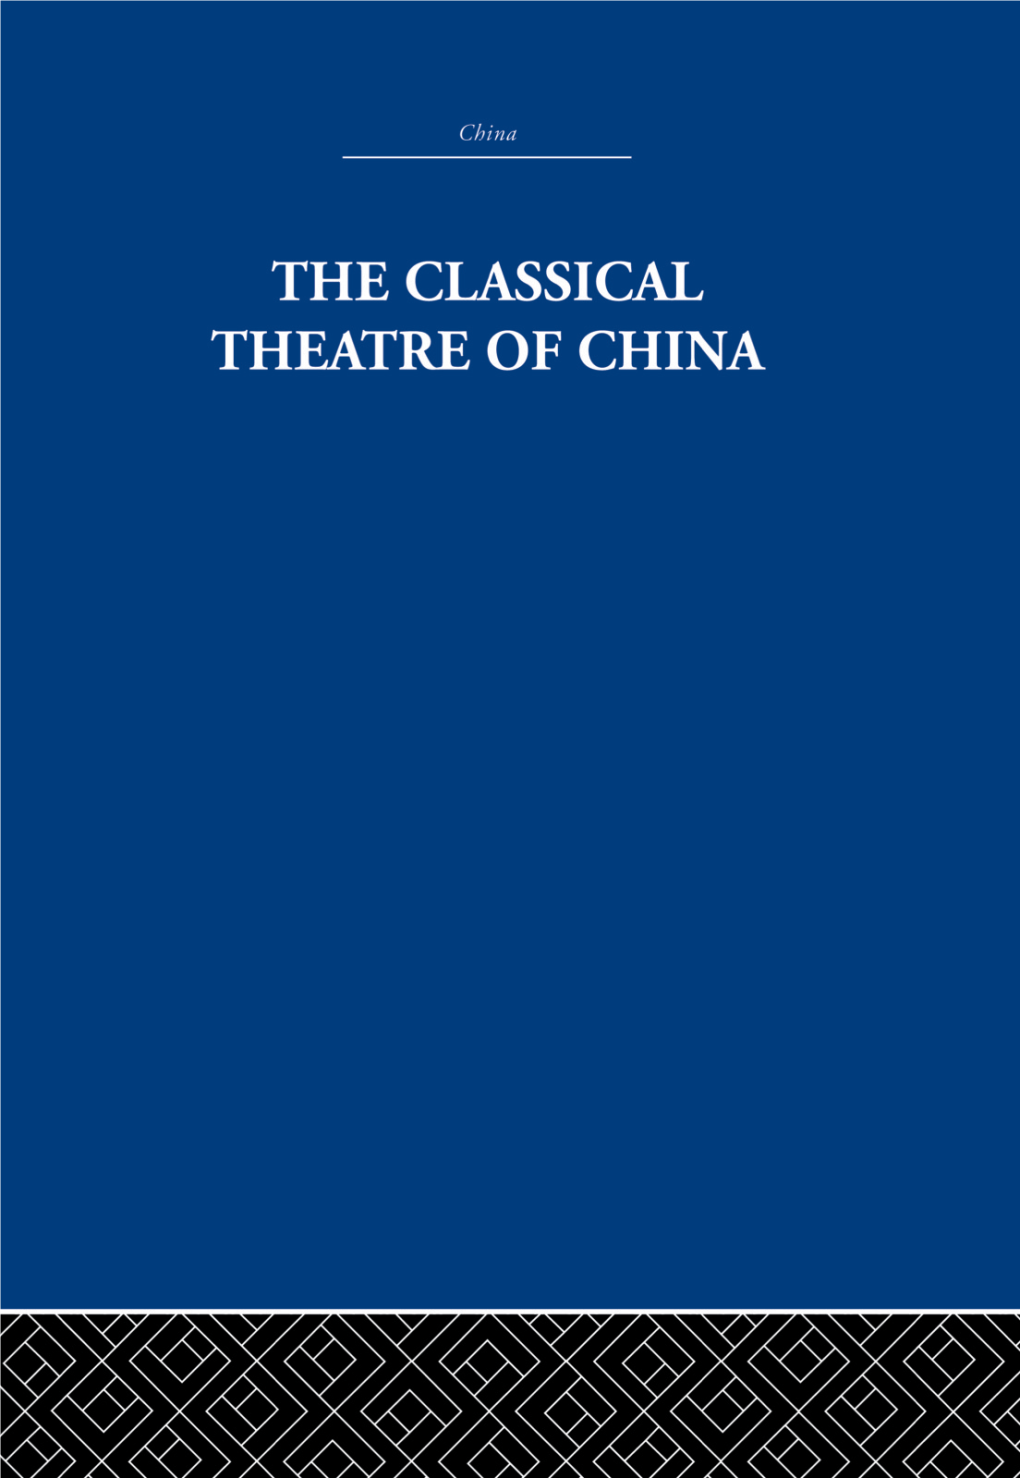 The Classical Theatre of China